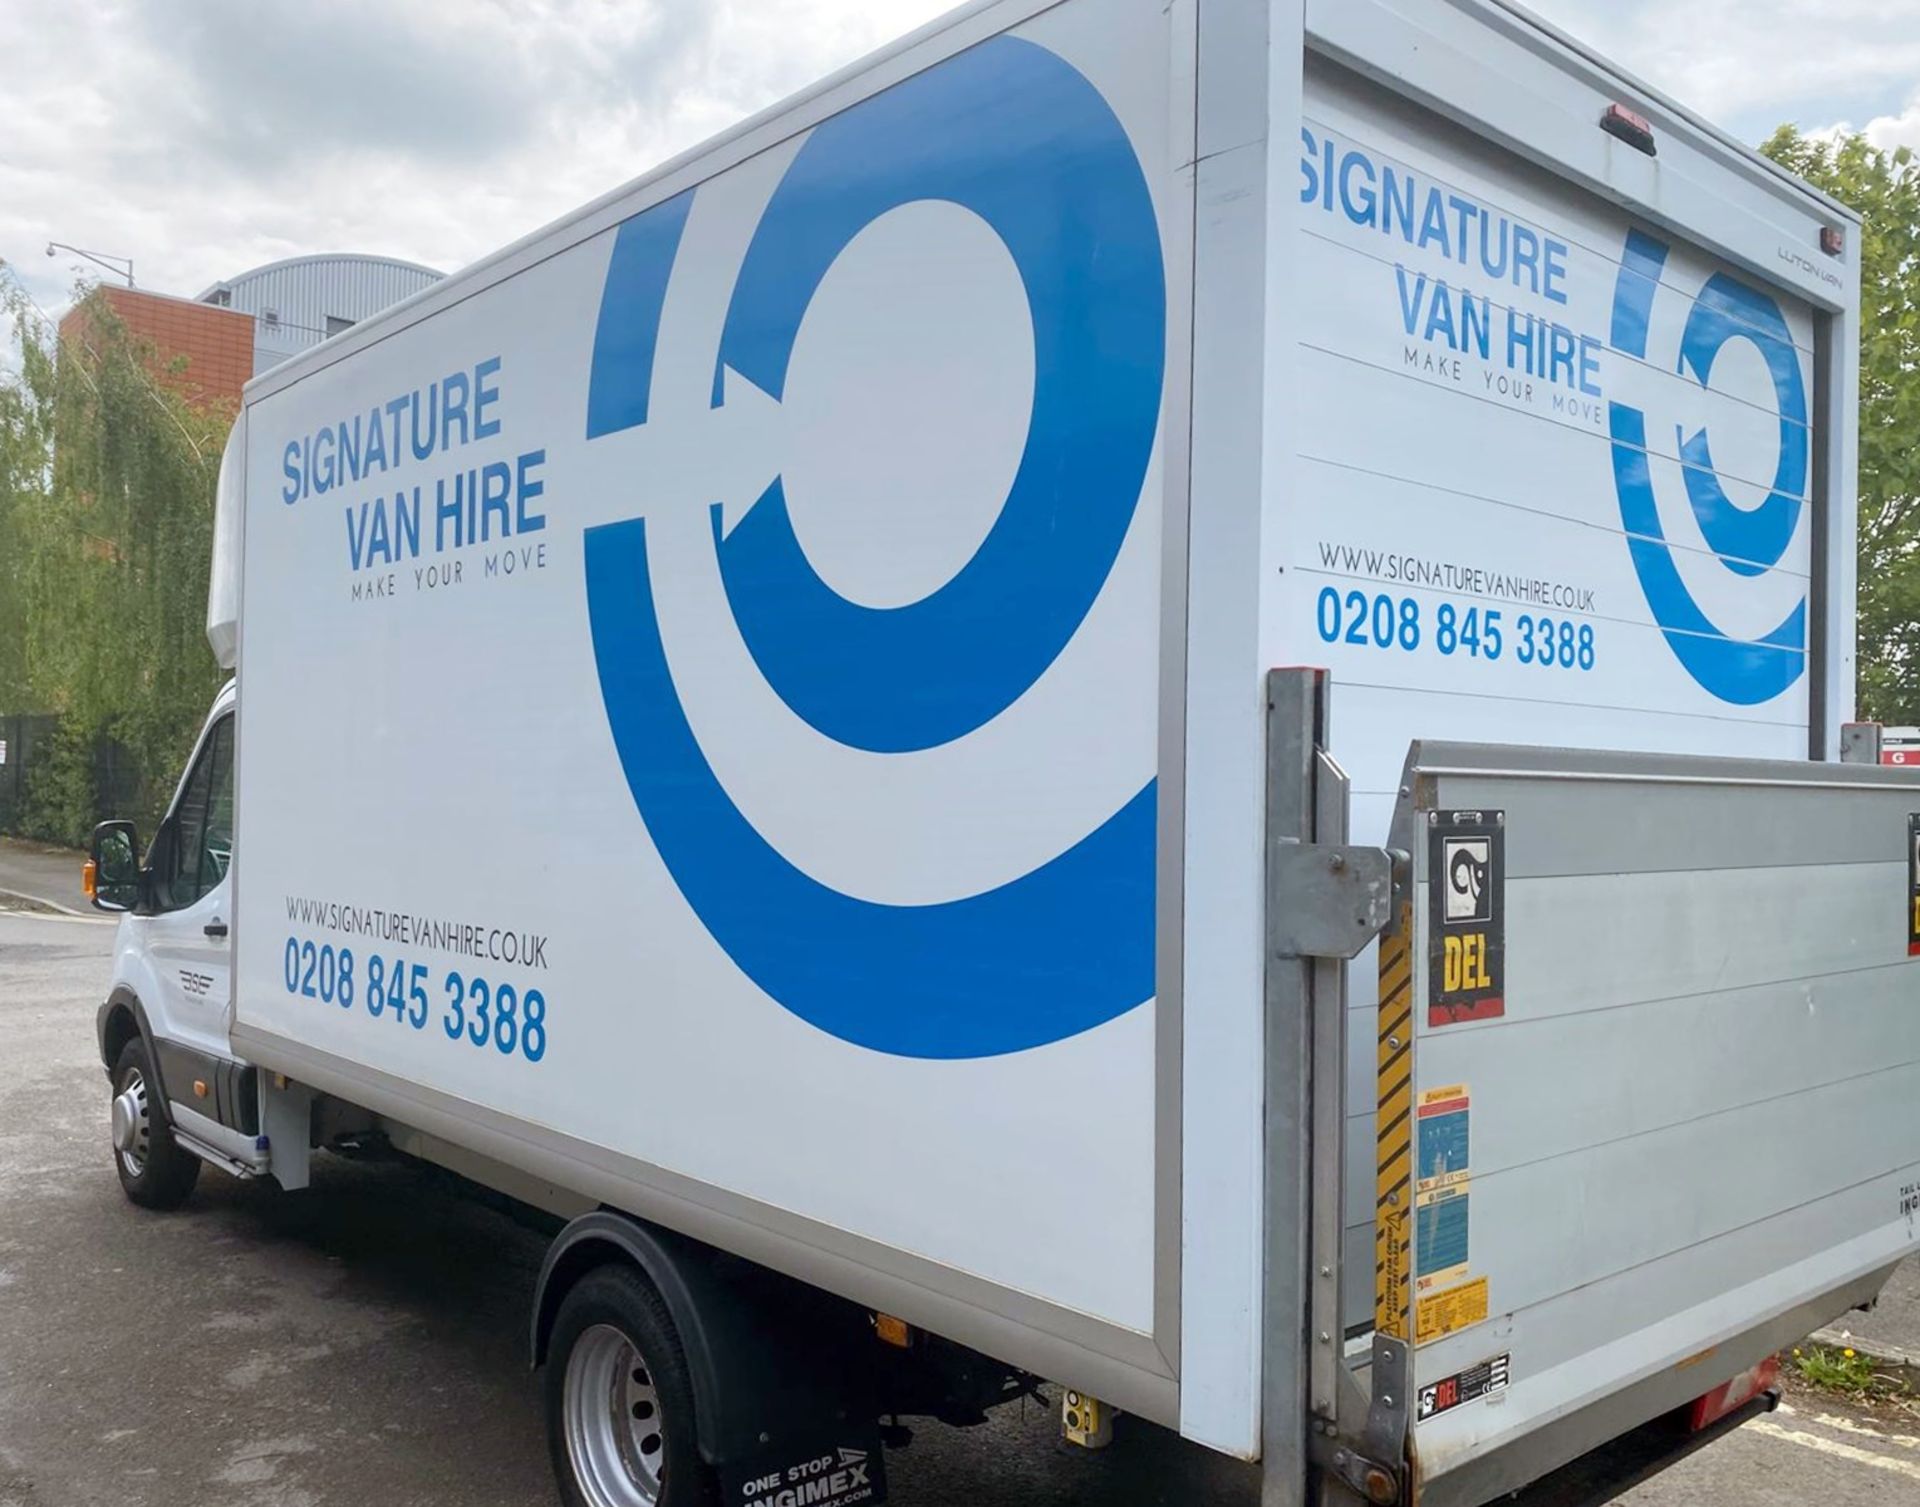 2018 Ford Transit 350 Luton Box Van With Tail Lift - 12 Month MOT - 18,344 Miles - ULEZ COMPLIANT - Image 6 of 26